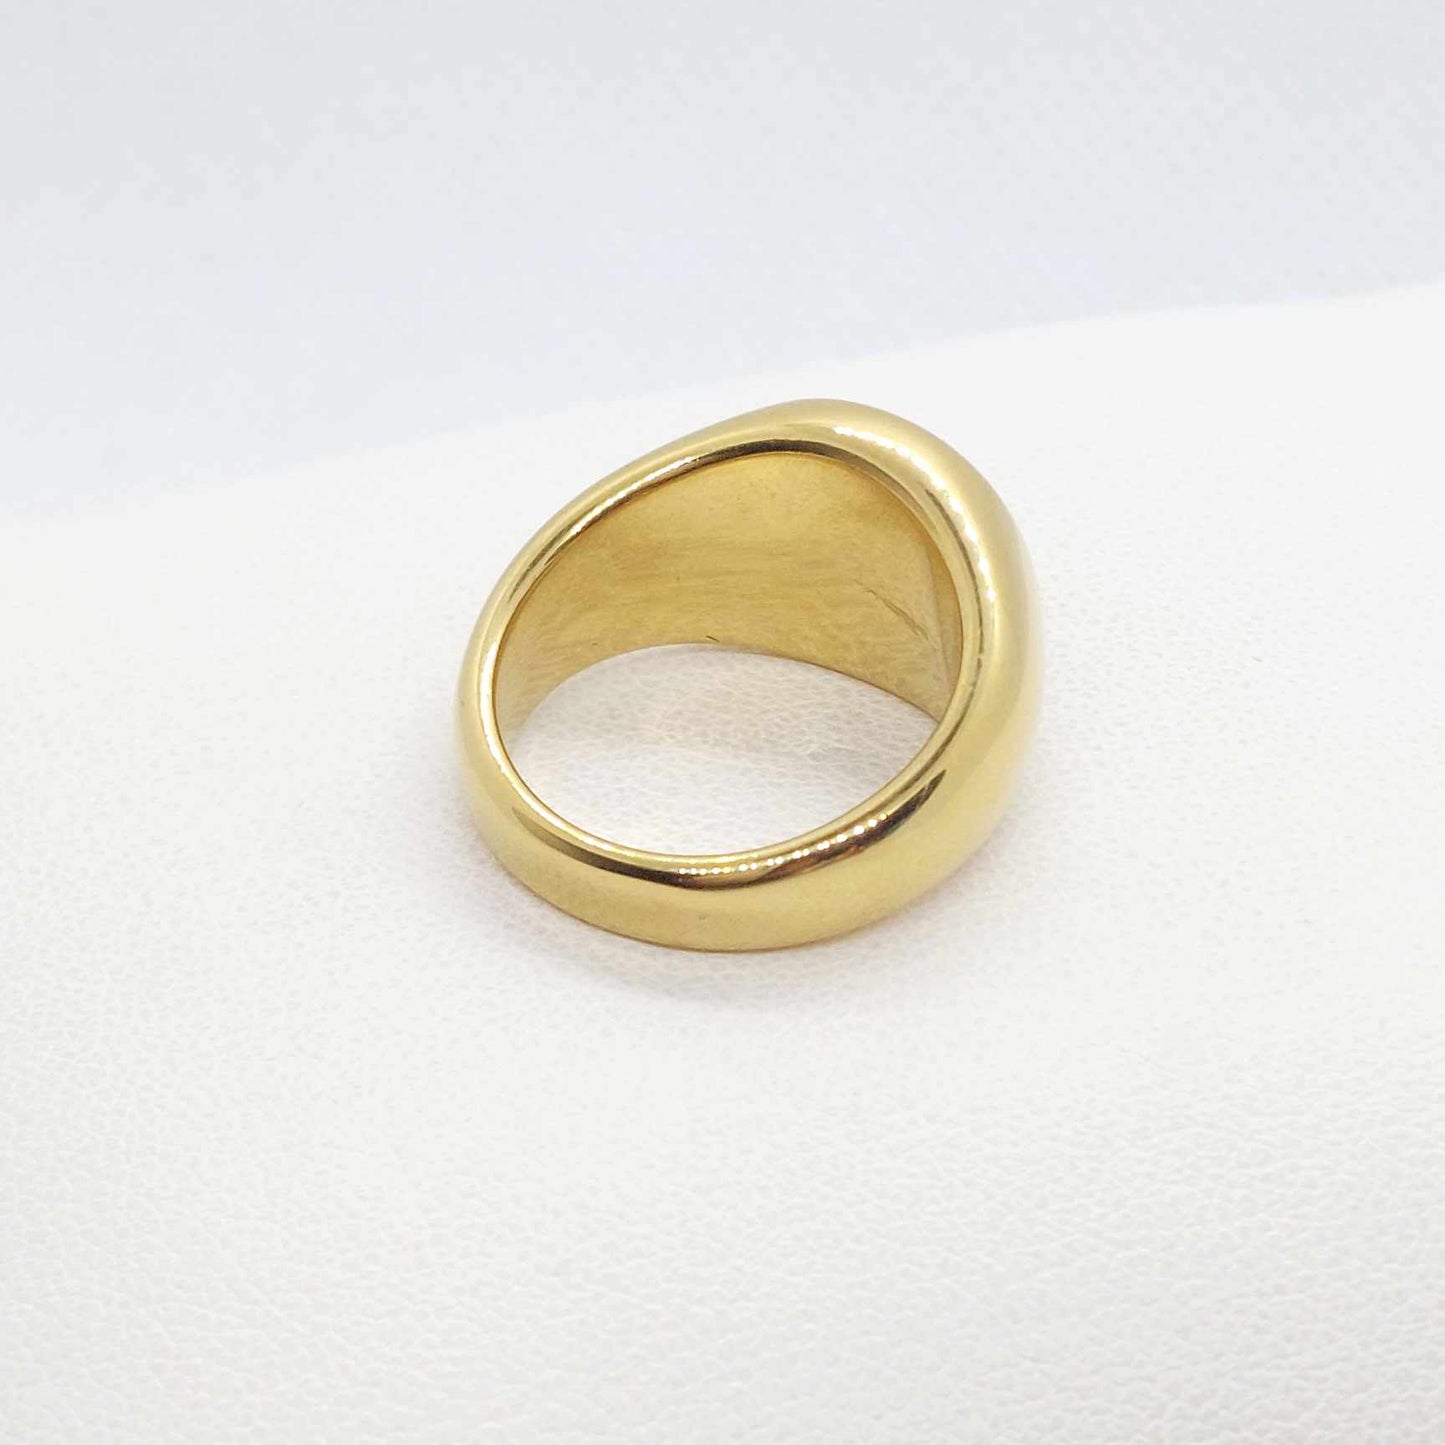 Yin Yang Ring in Gold Plated Stainless Steel